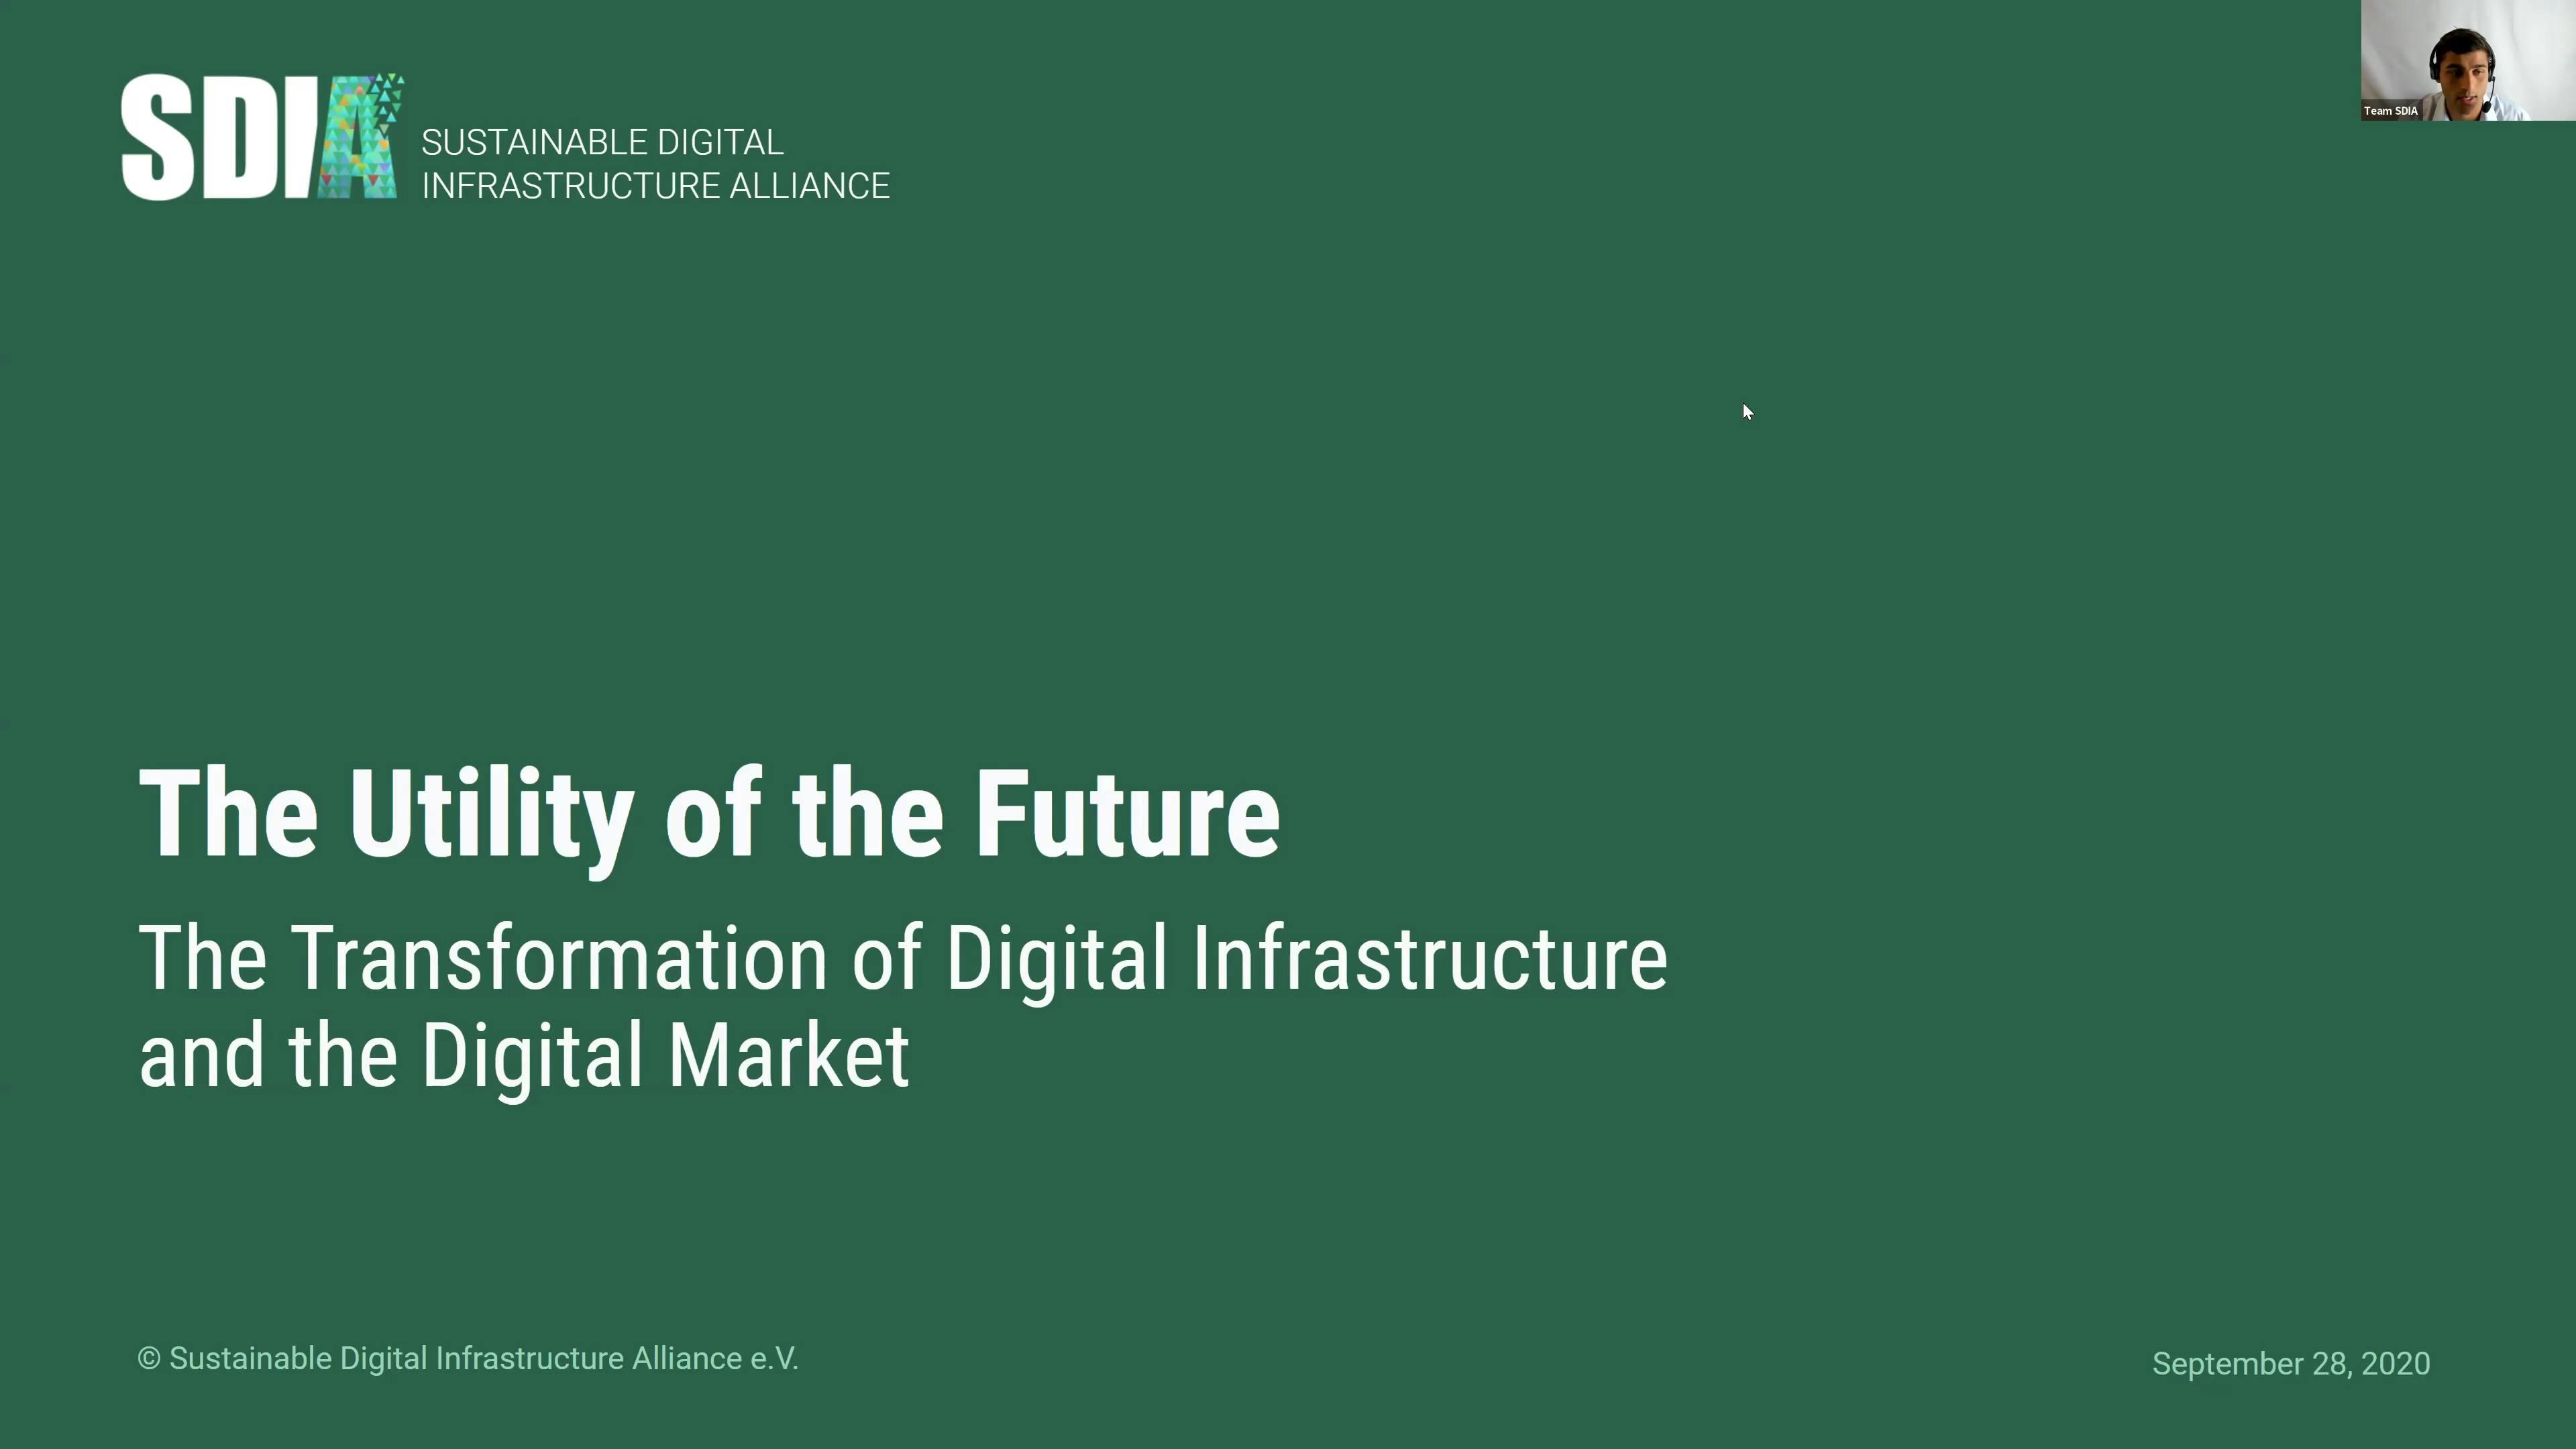 SDIA Webinar 'The Utility of the Future' Recording Now Available